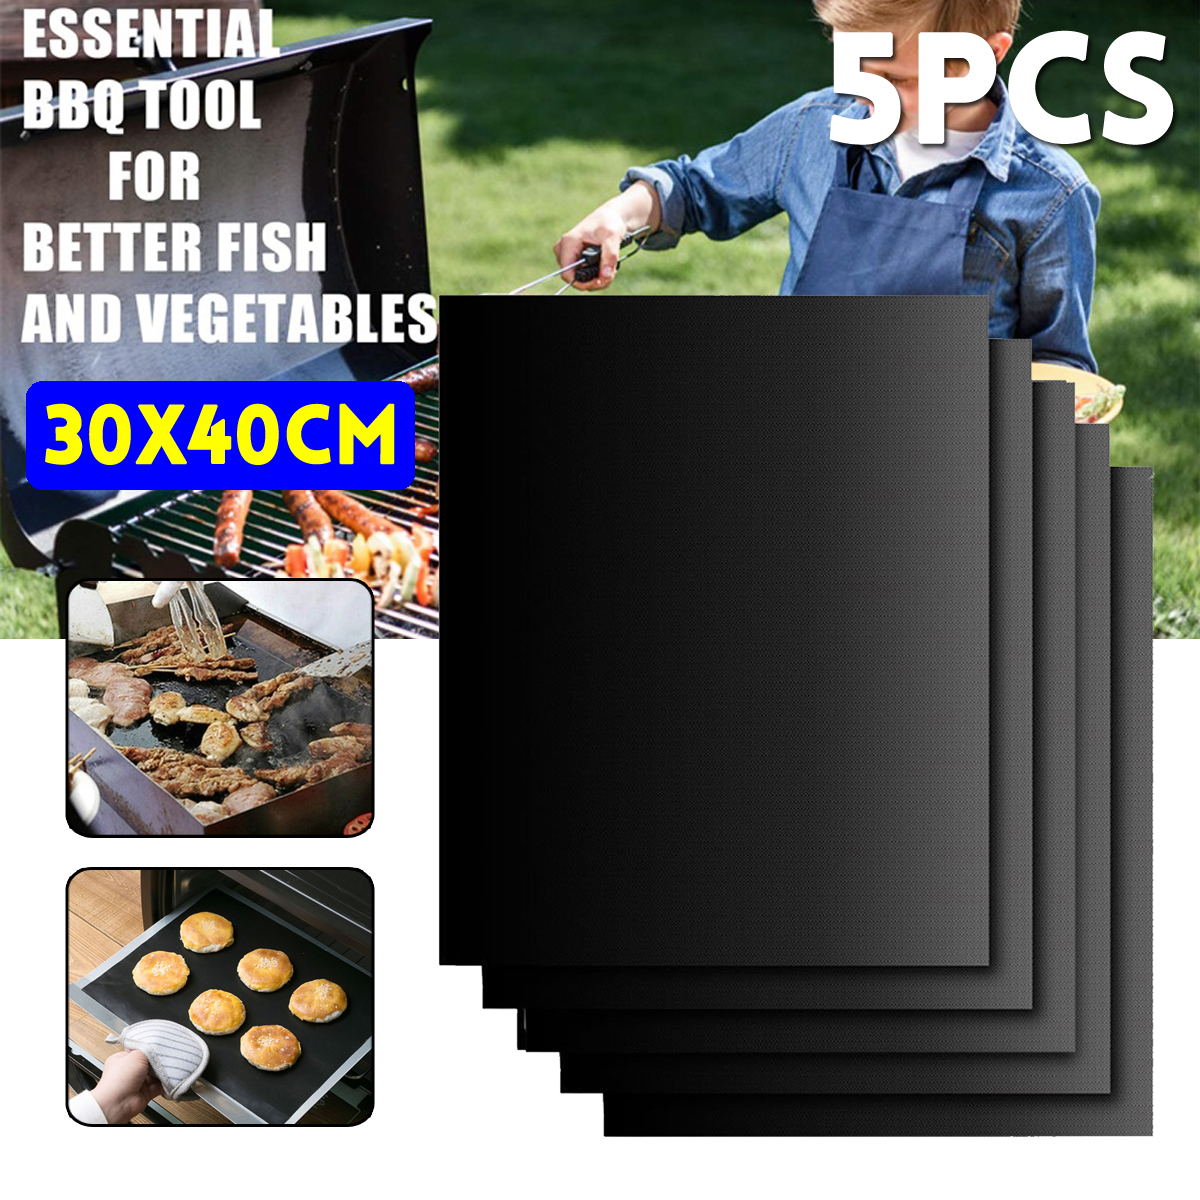 5pcs-BBQ-Grill-Mat-Barbecue-Outdoor-Baking-Non-stick-Pad-Reusable-And-Easy-To-Clean-Cooking-Mat-1698957-1